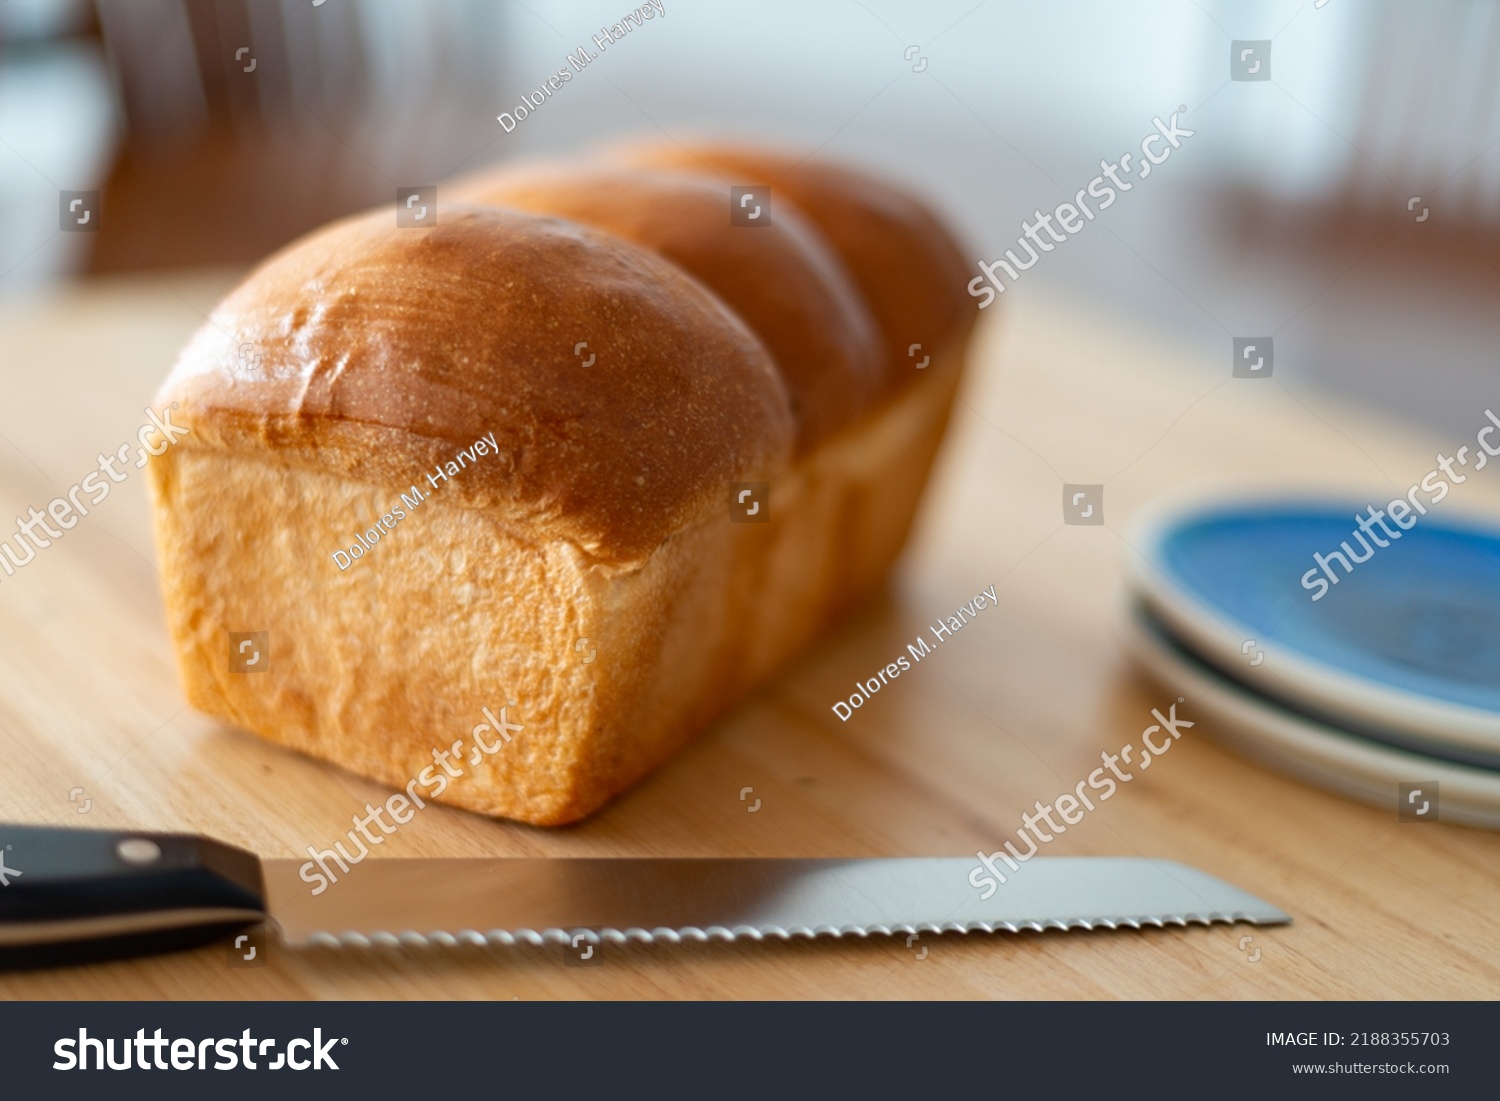 A single loaf of fresh white crusty bread on a wooden cutting board on a kitchen table. The warm crisp bun has melted butter over the crisp loaf buns. Side plates and a knife are next to the loaf.  #2188355703